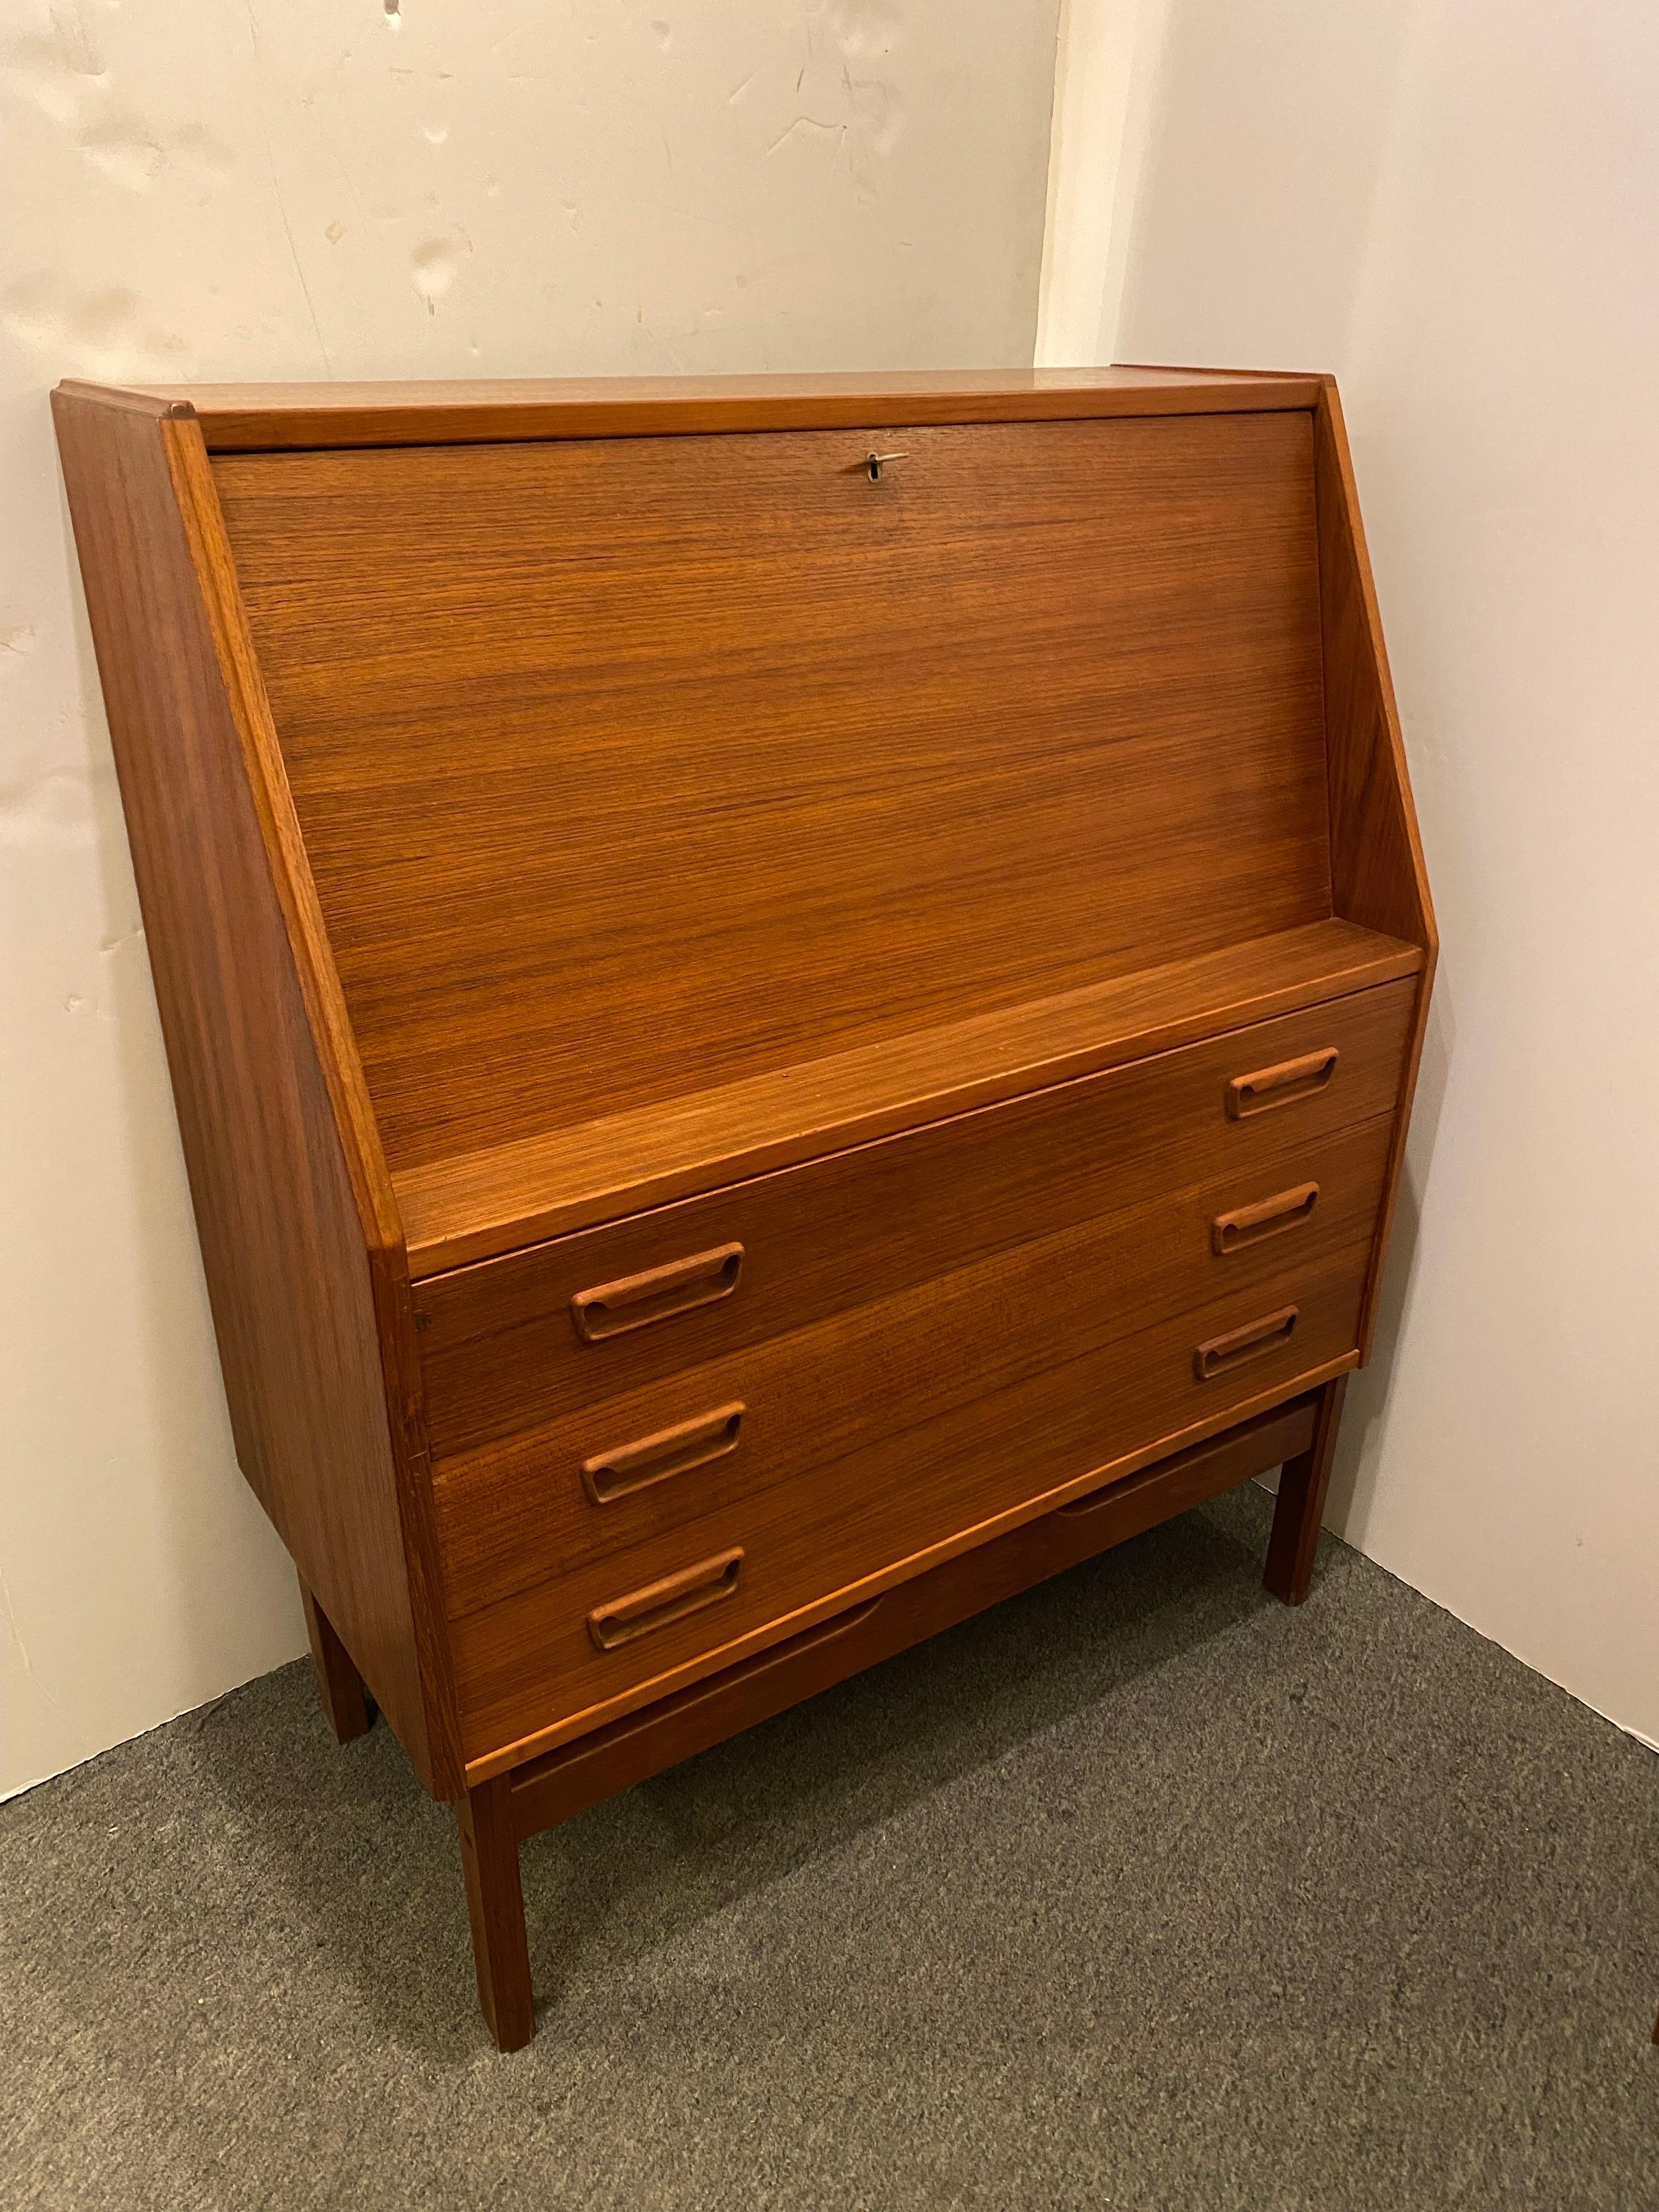 Dyrlund Teak Drop Front Desk with 3 pull out lower drawers.  Very clean condition.  Key acts as knob but does not lock fold down.  2 little pullout drawers inside desk area.  Top of desk was refinished.
